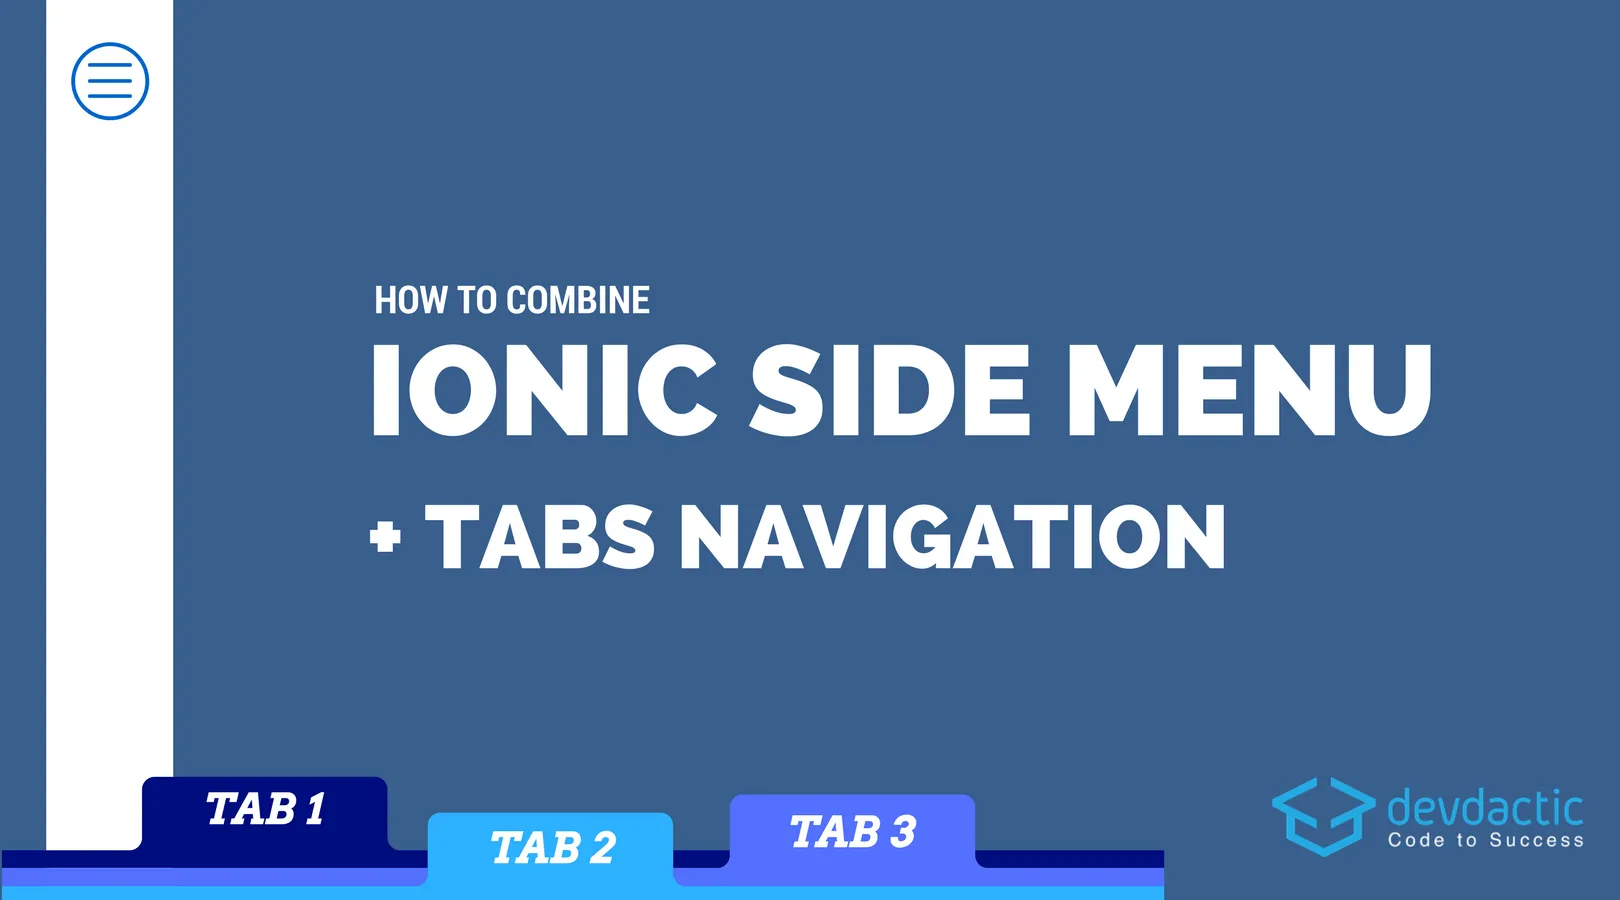 How to Combine Ionic Side Menu and Tabs Navigation